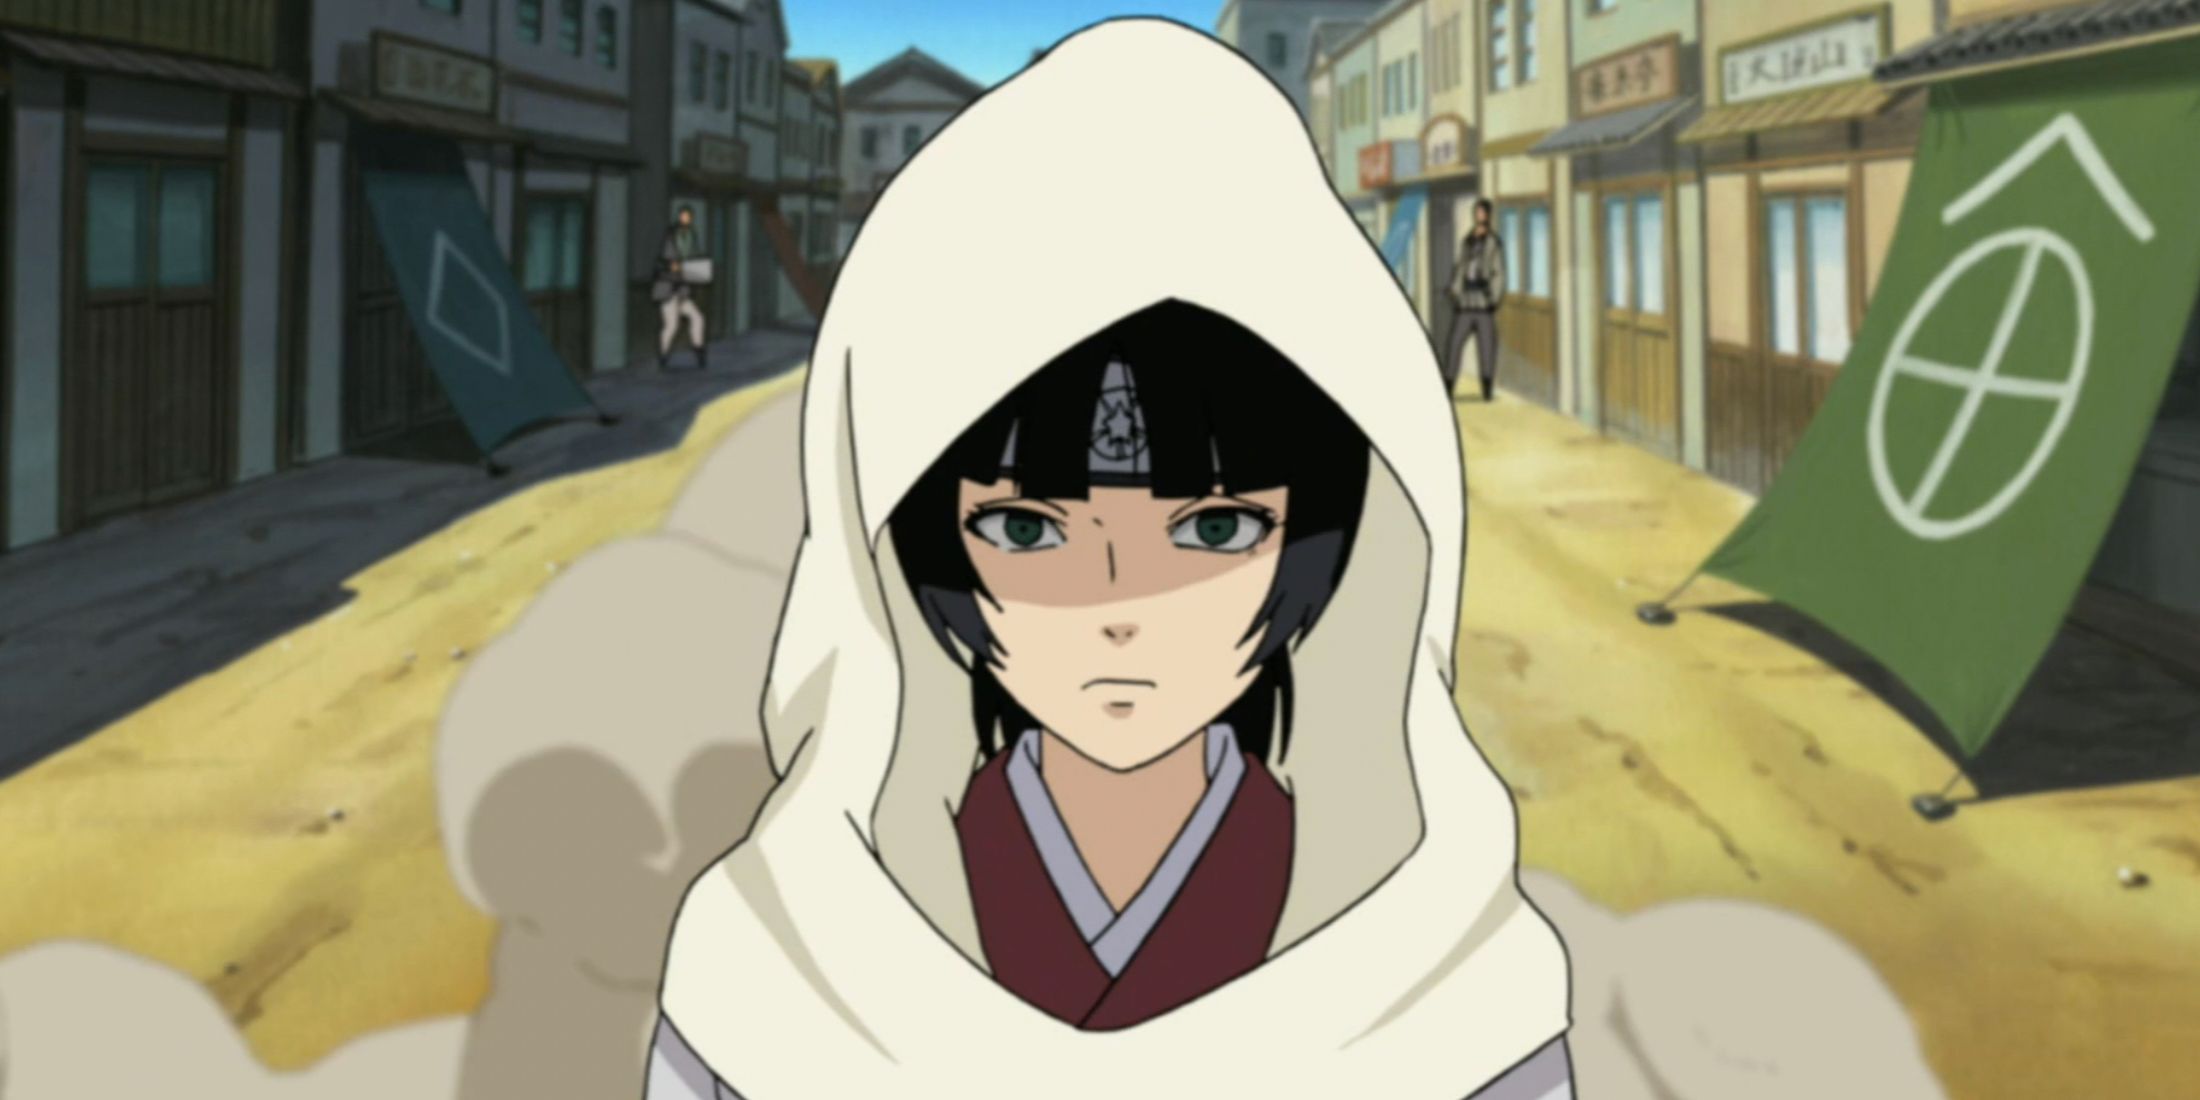 A hooded princess stands in the middle of the street in Naruto